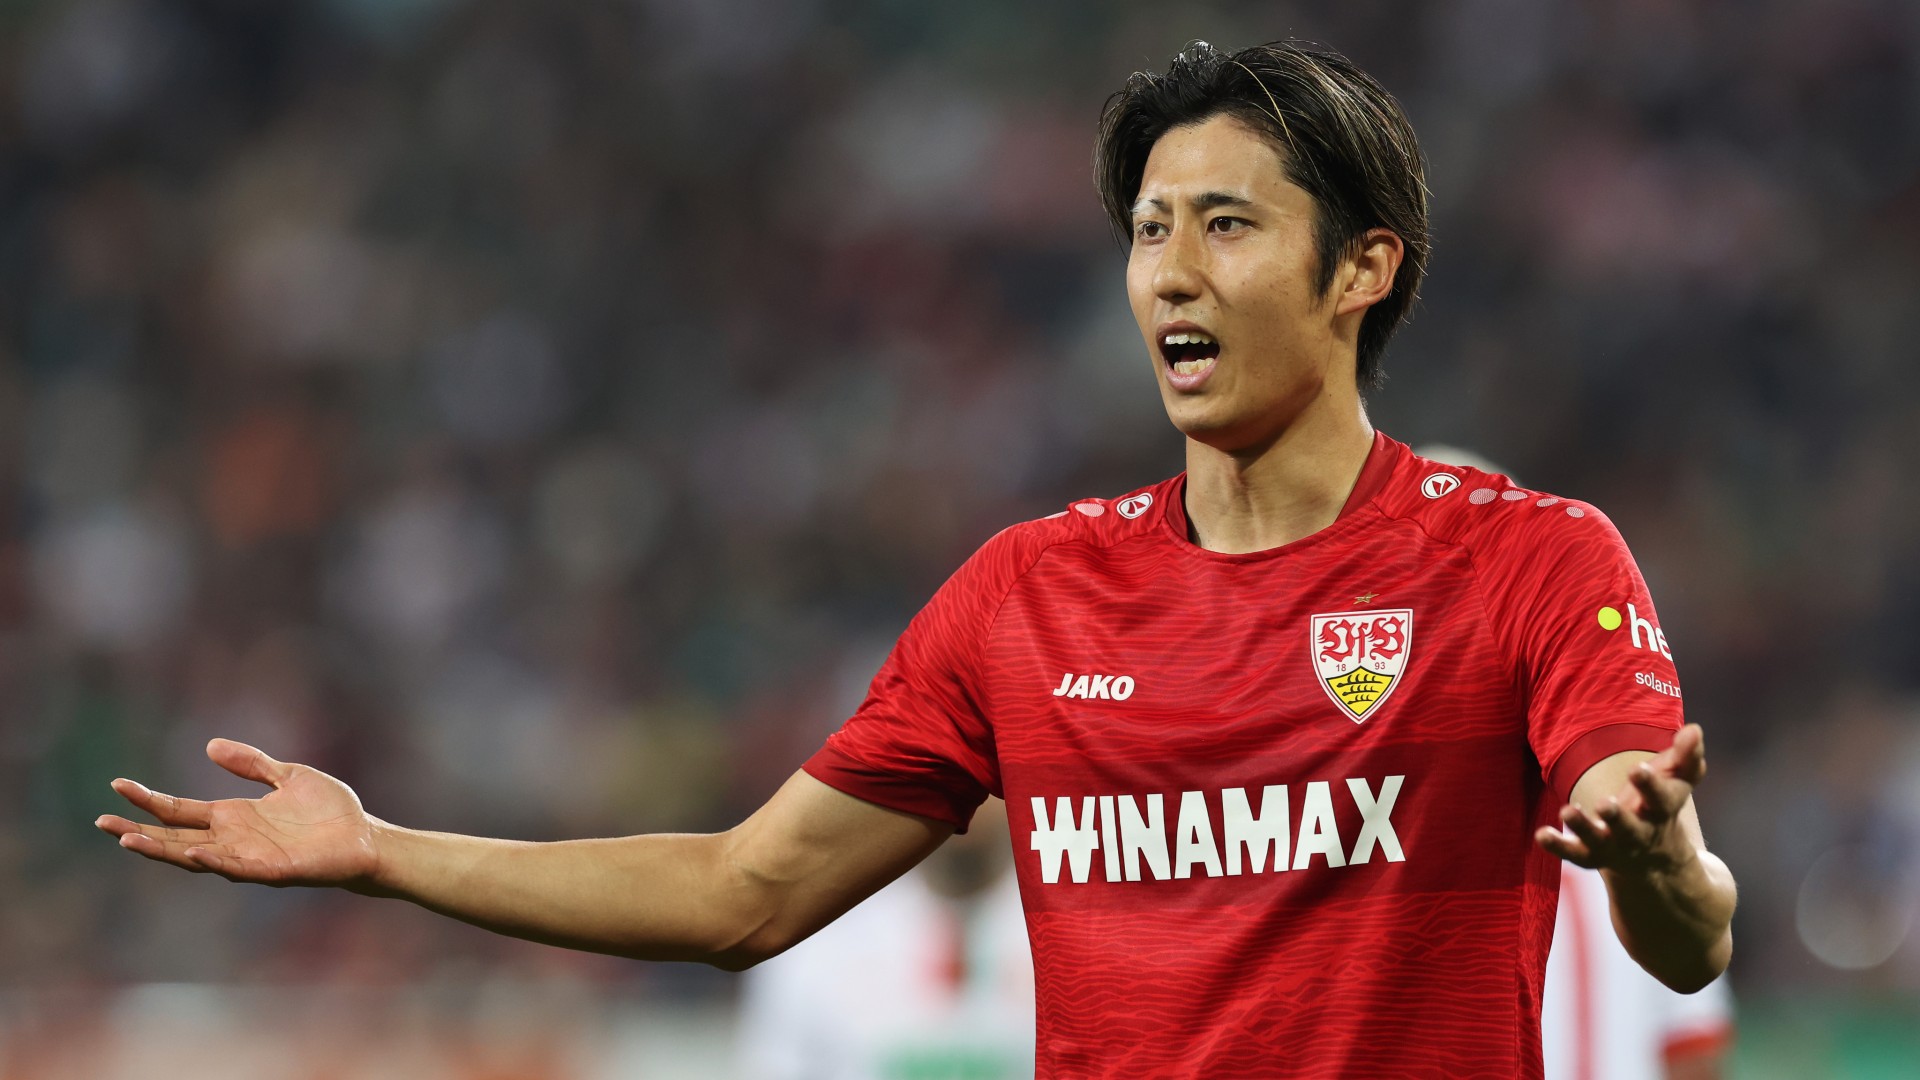 Ito joins Bayern from Stuttgart